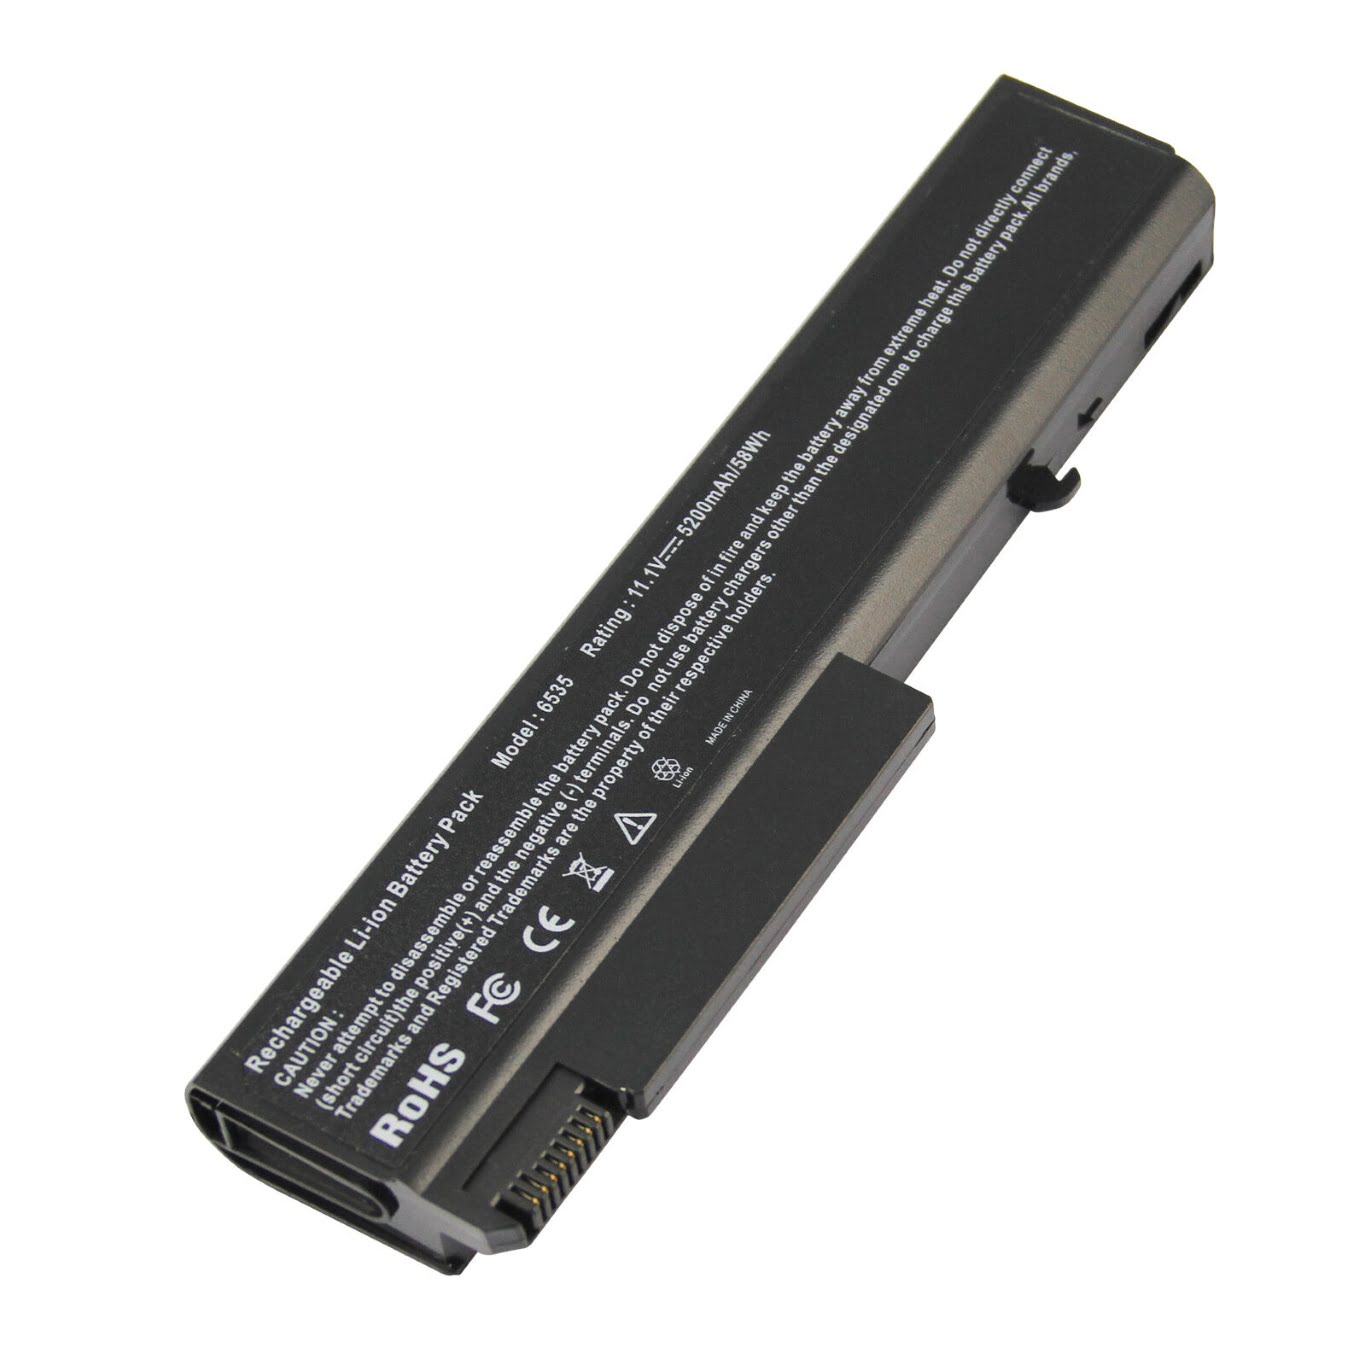 482962-001, 484786-001 replacement Laptop Battery for HP 6500B, 6700B, 6 cells, 11.1 V, 5200 Mah